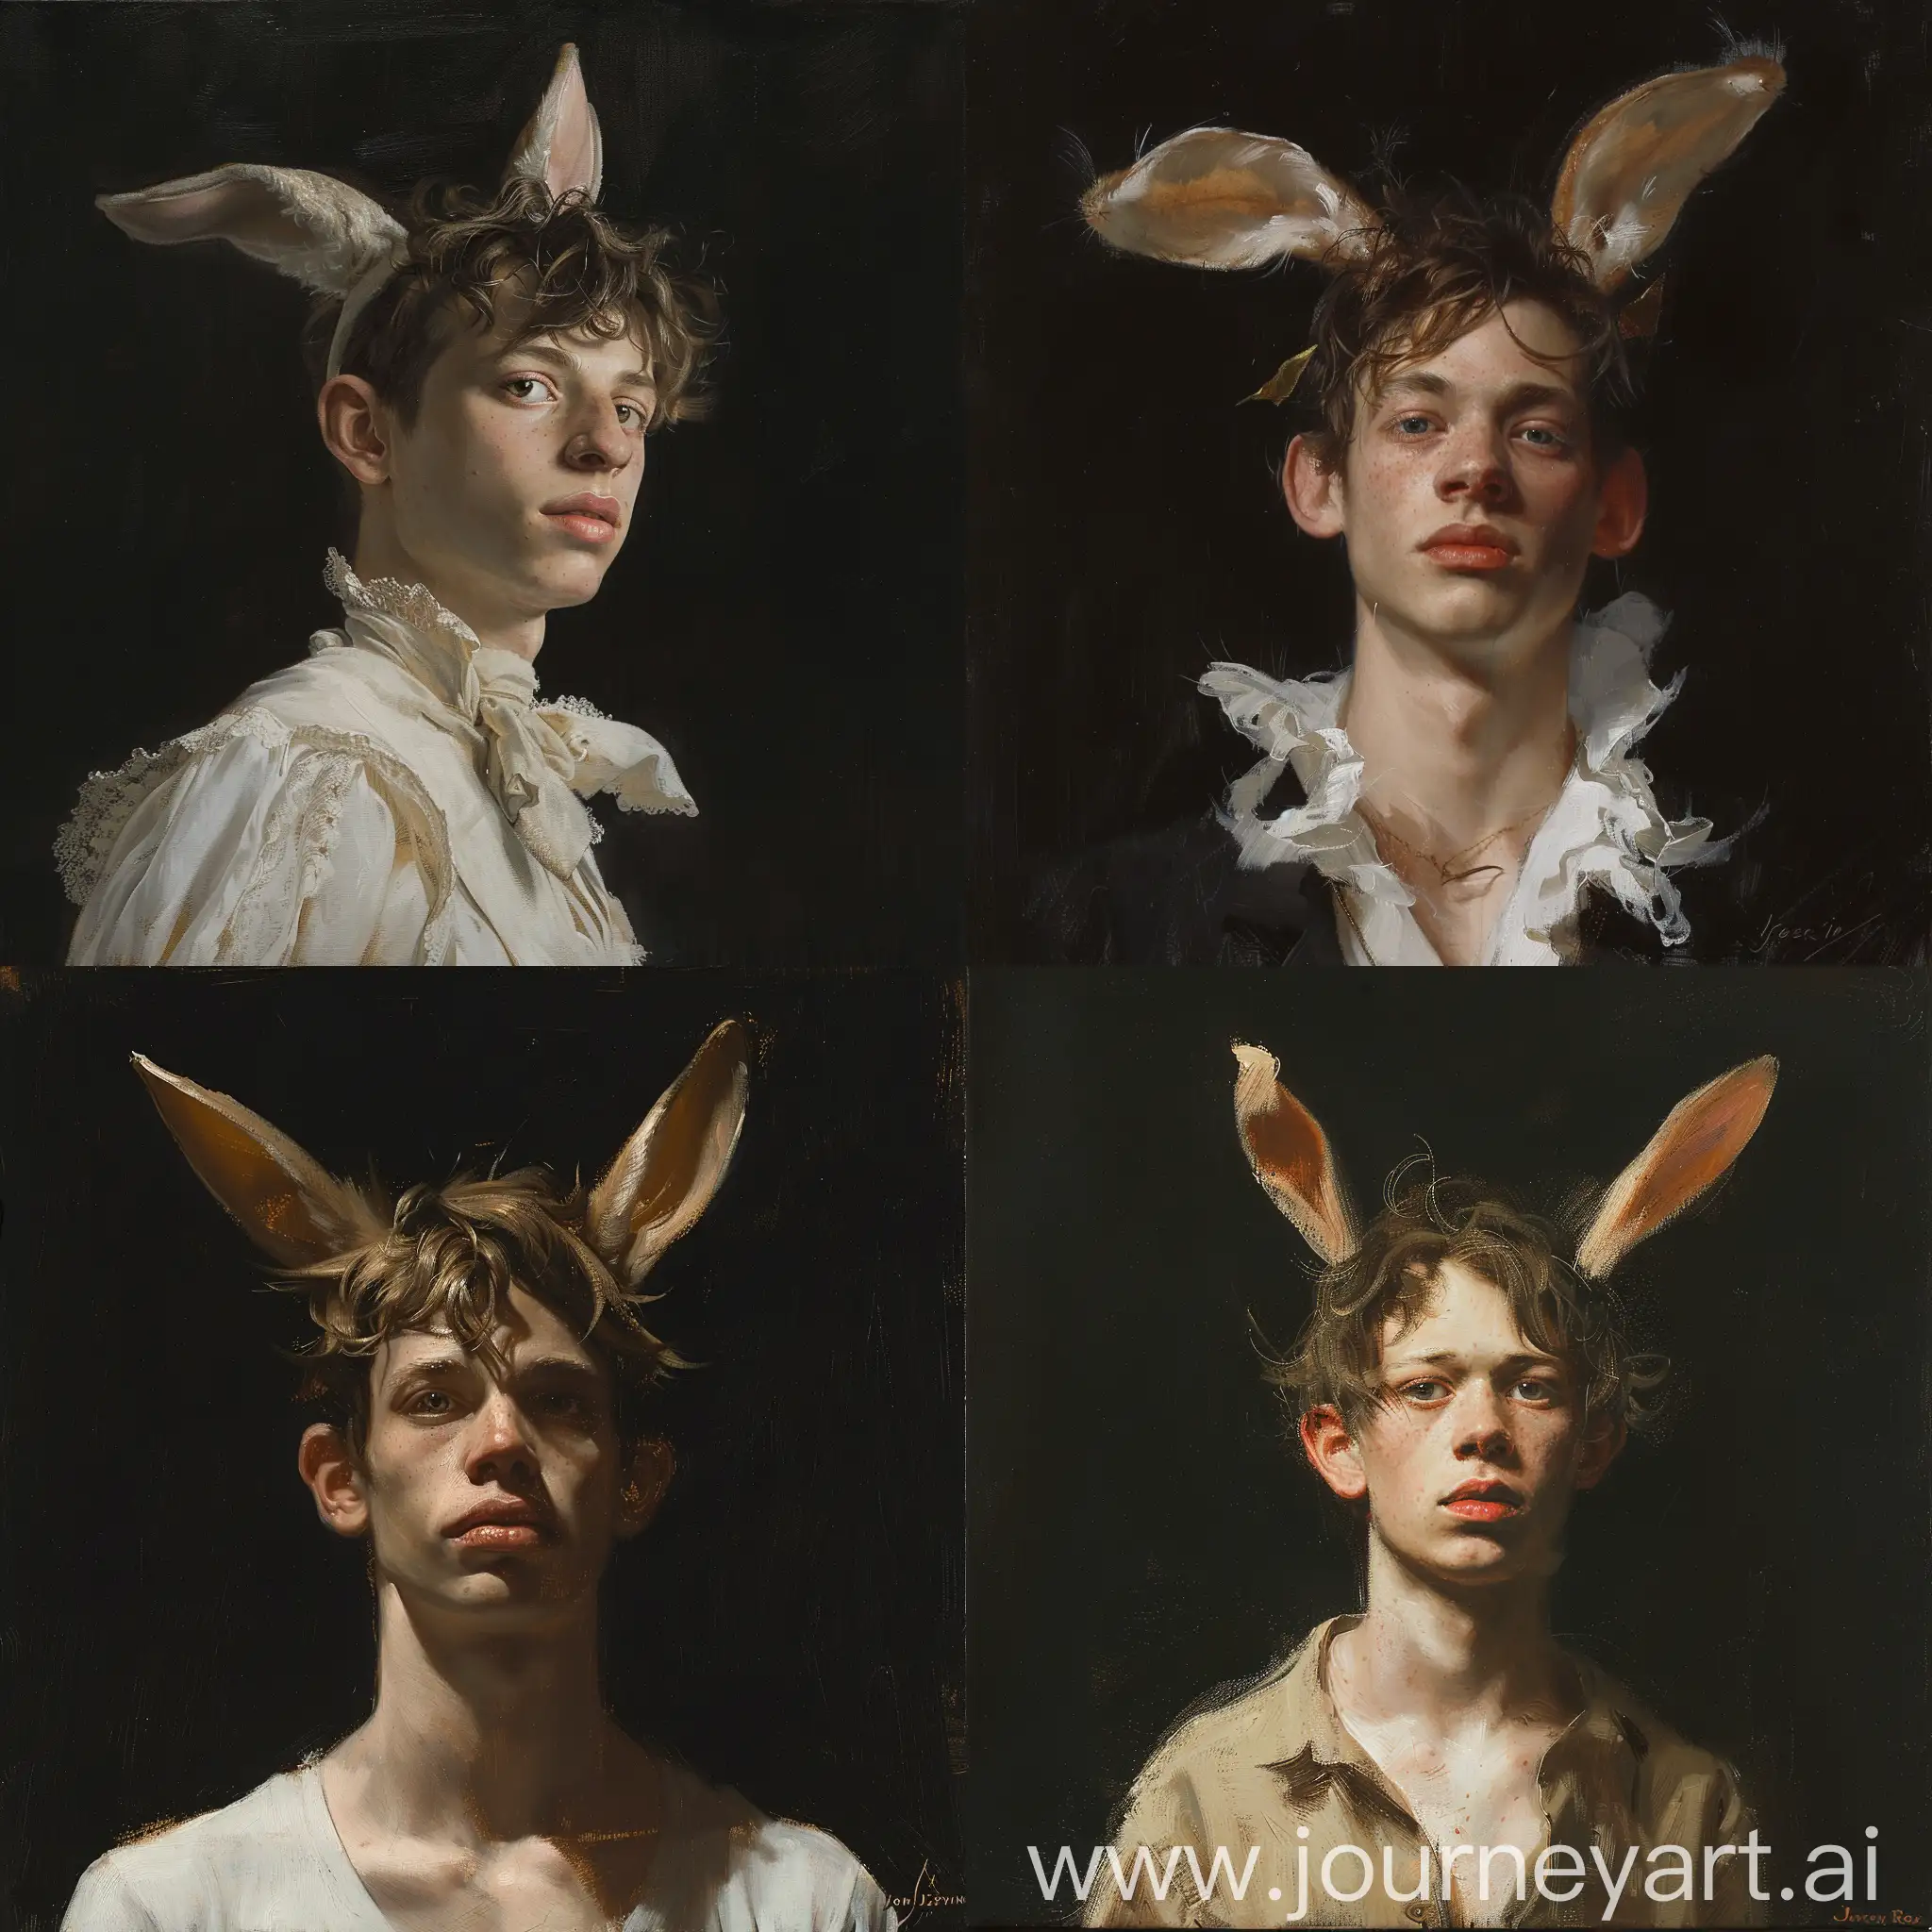 a painting of a young man with rabbit ears, wlop John singer Sargent, jeremy lipkin and rob rey, range murata jeremy lipking, John singer Sargent, black background, jeremy lipkin, lensculture portrait awards, casey baugh and james jean, detailed realism in painting, award-winning portrait, amazingly detailed oil painting